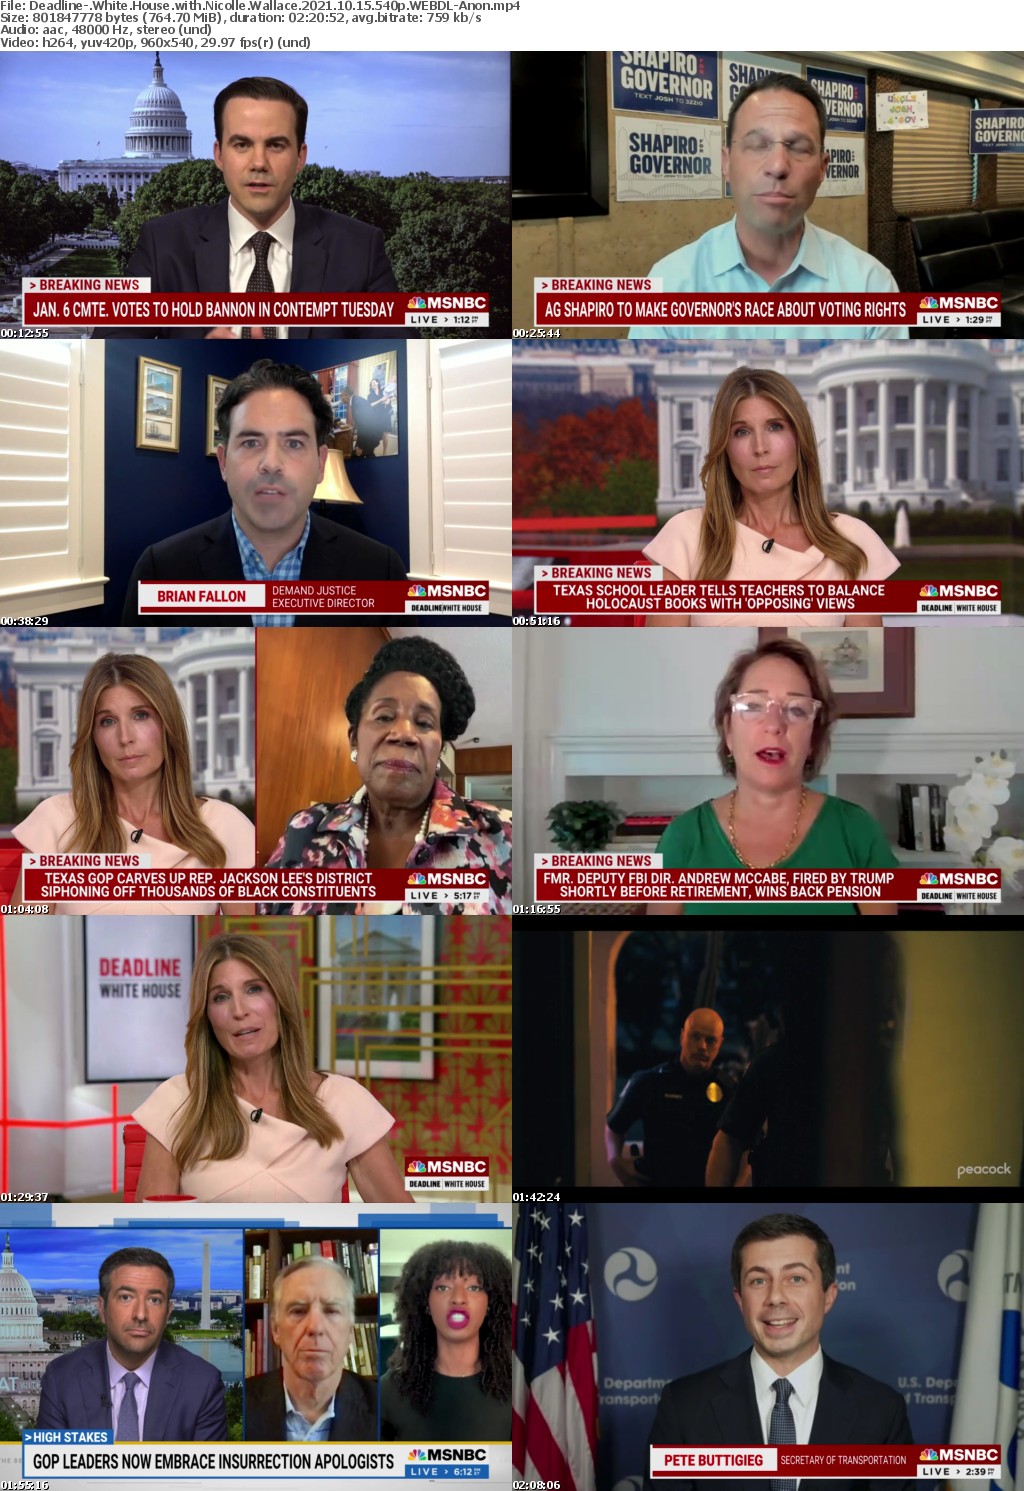 Deadline- White House with Nicolle Wallace 2021 10 15 540p WEBDL-Anon